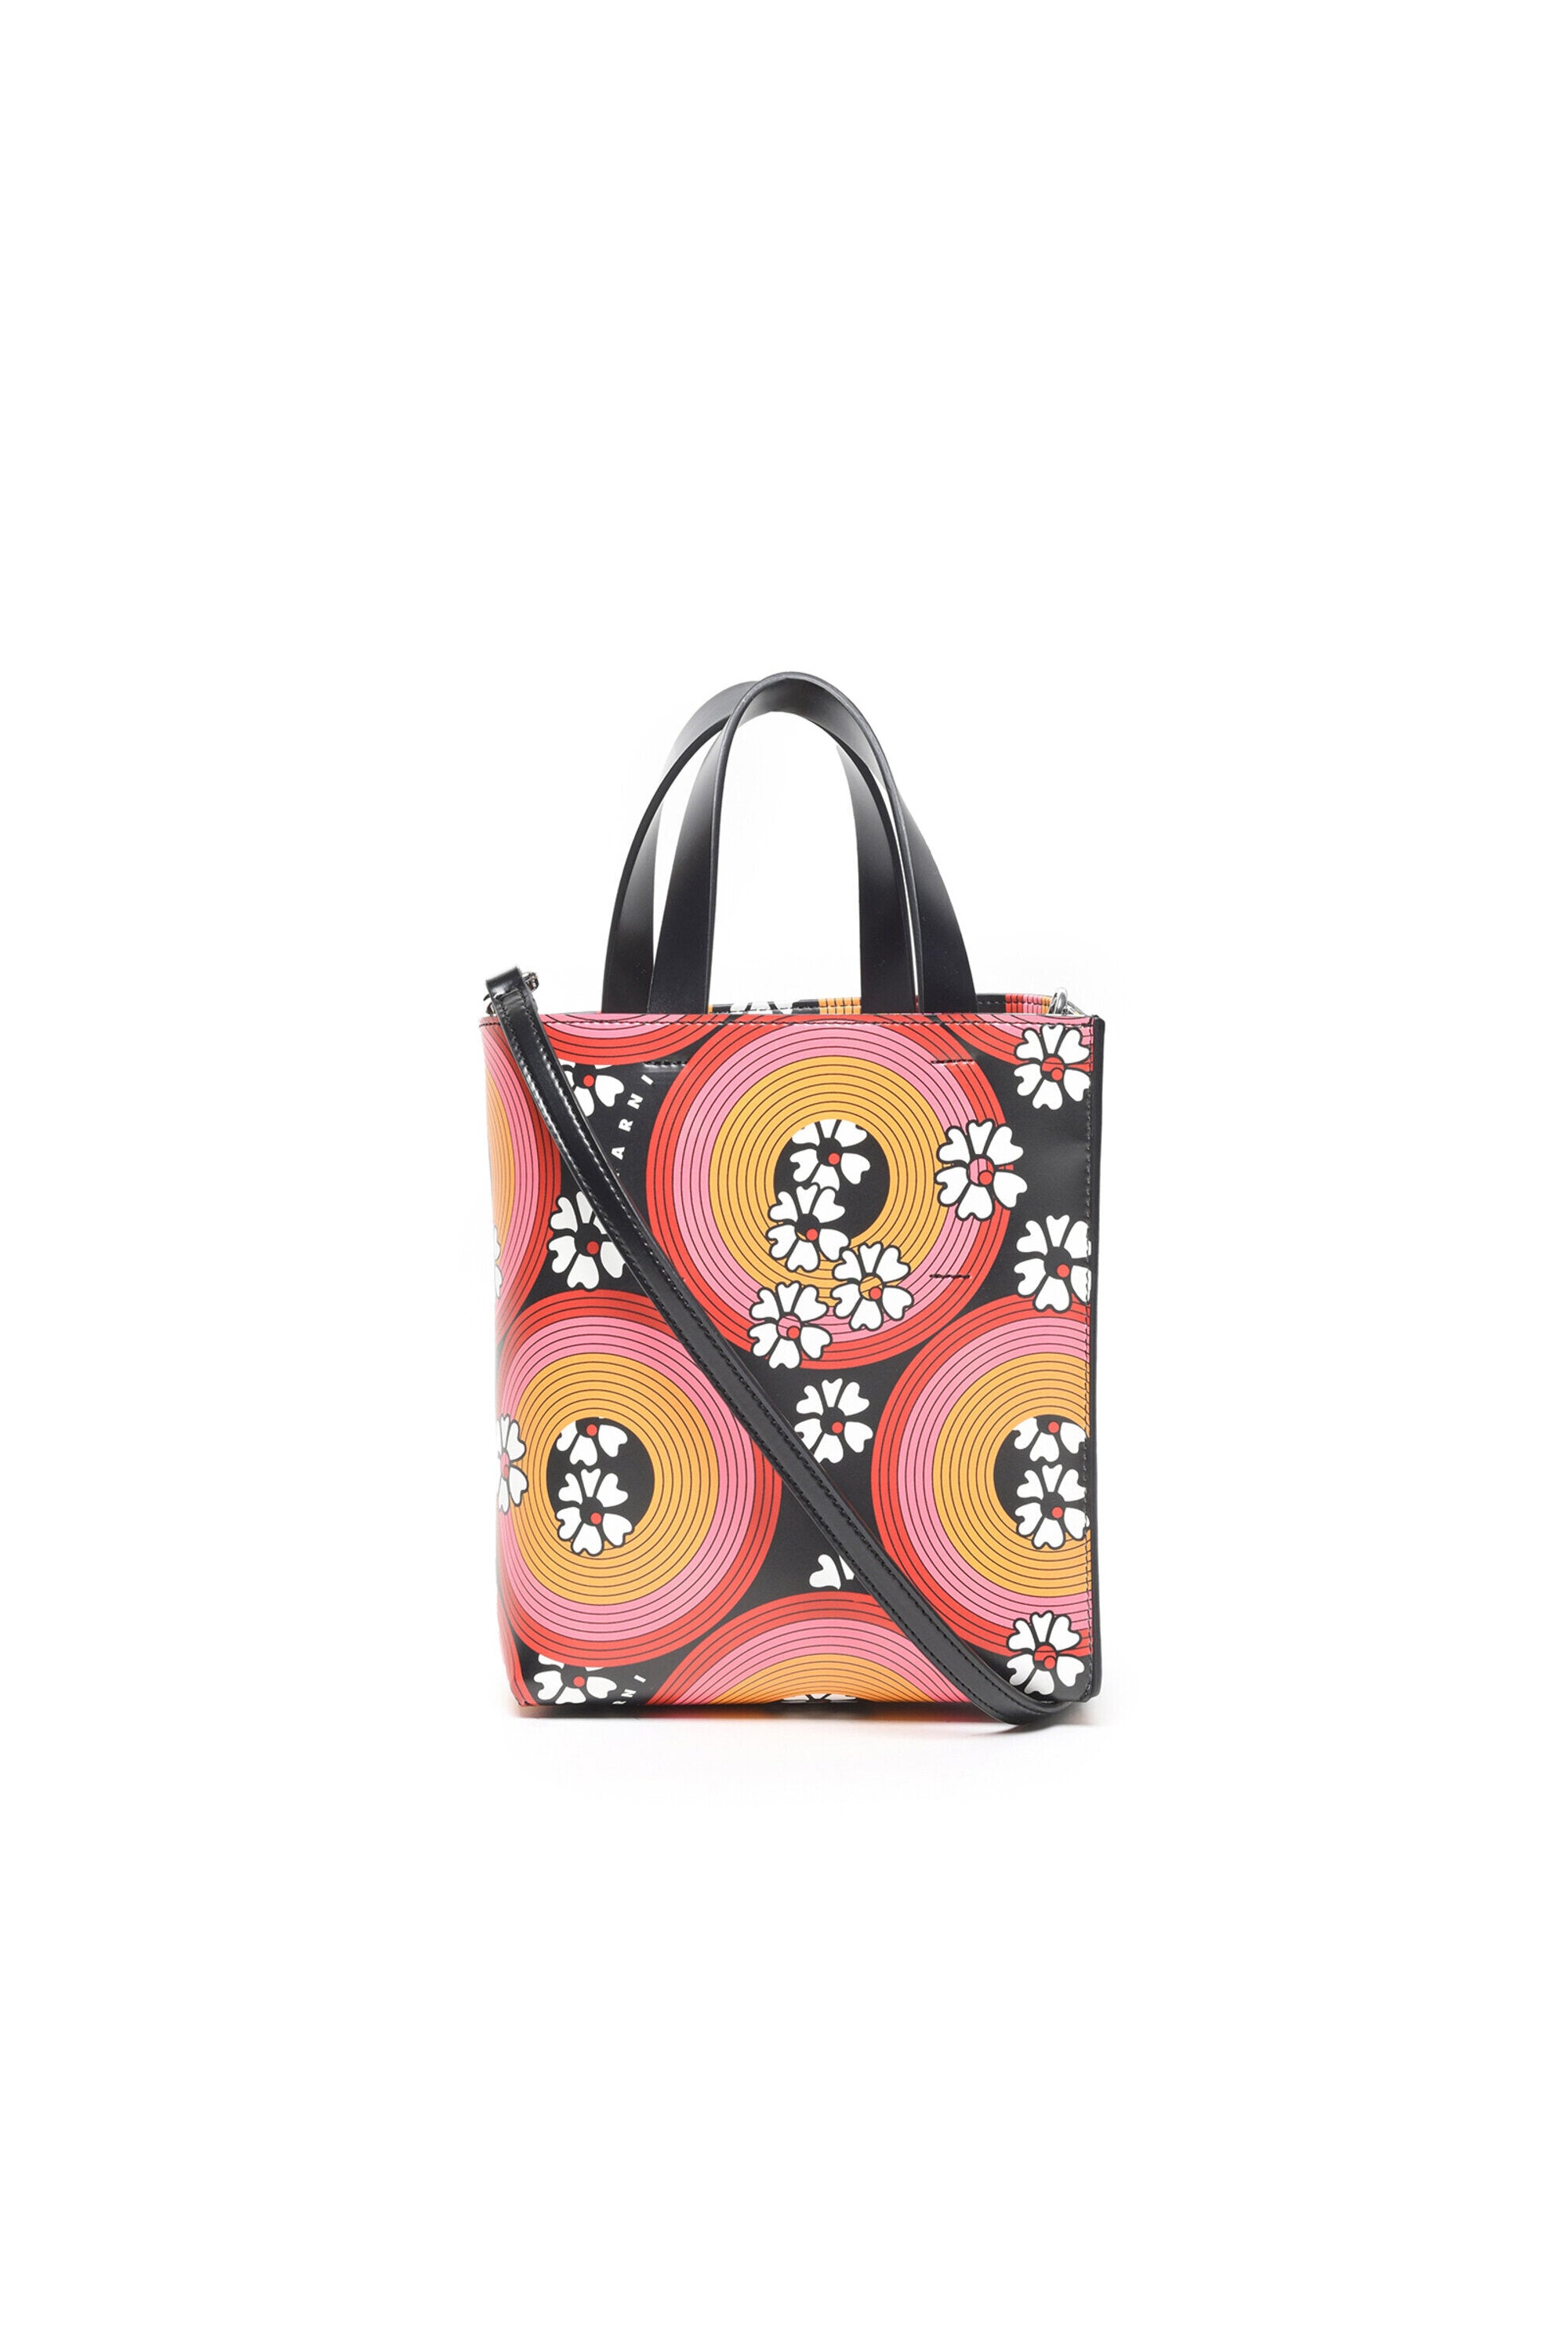 Circles 70'S allover patterned imitation leather bag